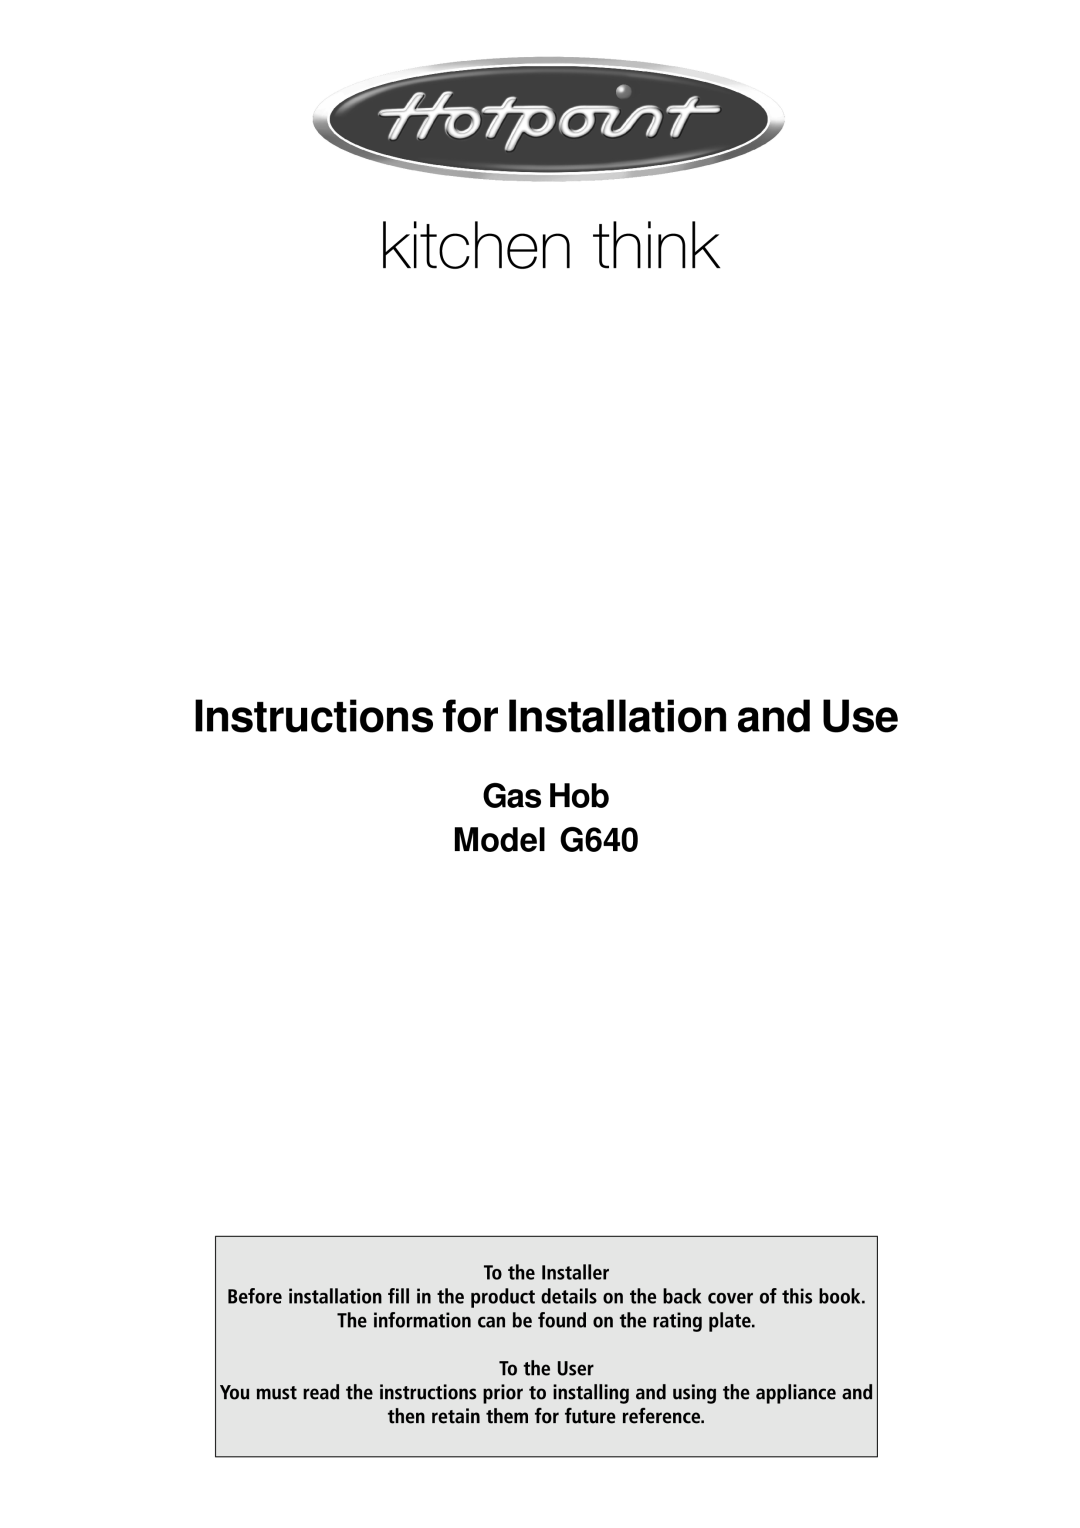 Hotpoint manual Gas Hob Model G640, Instructions for Installation and Use 